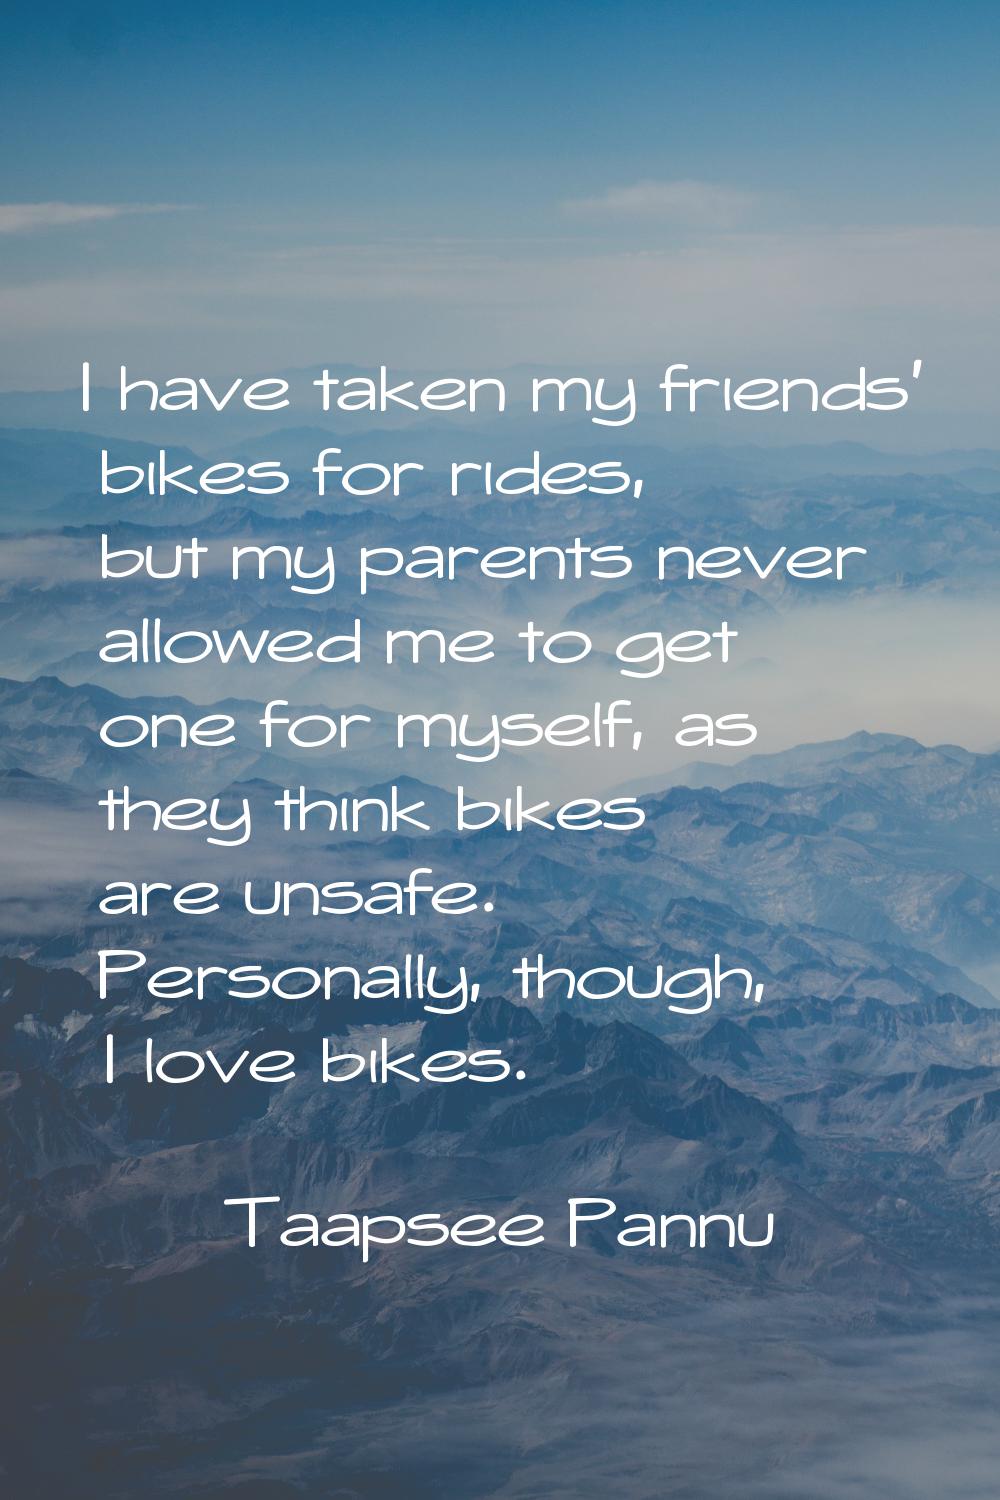 I have taken my friends' bikes for rides, but my parents never allowed me to get one for myself, as